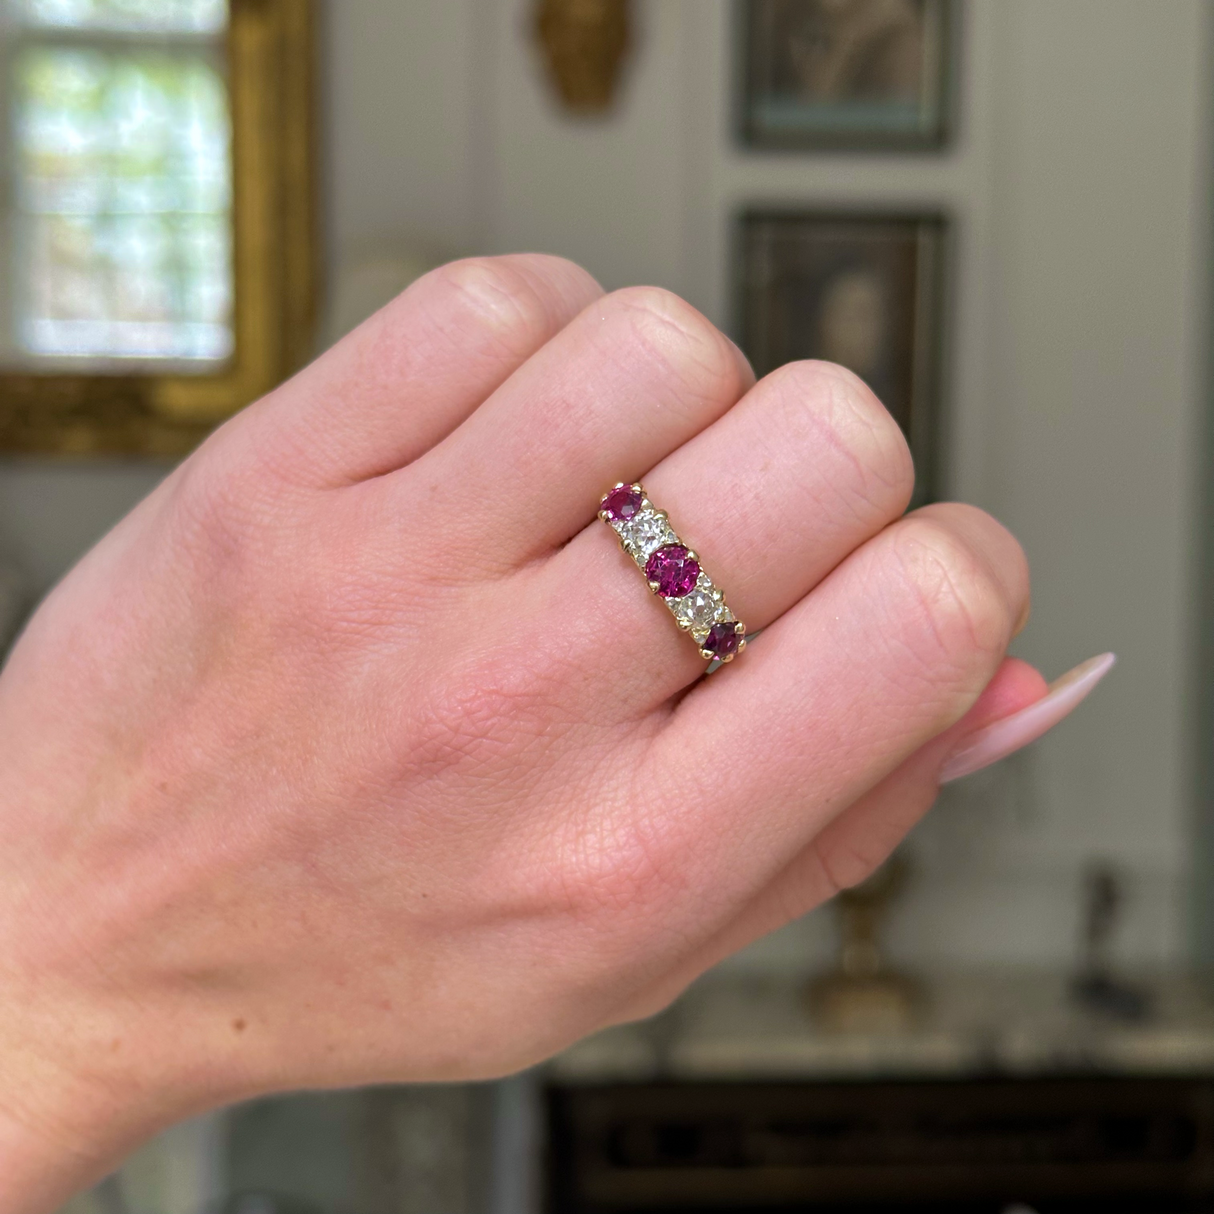 Antique, Edwardian five stone ruby and diamond ring, worn on closed hand. 